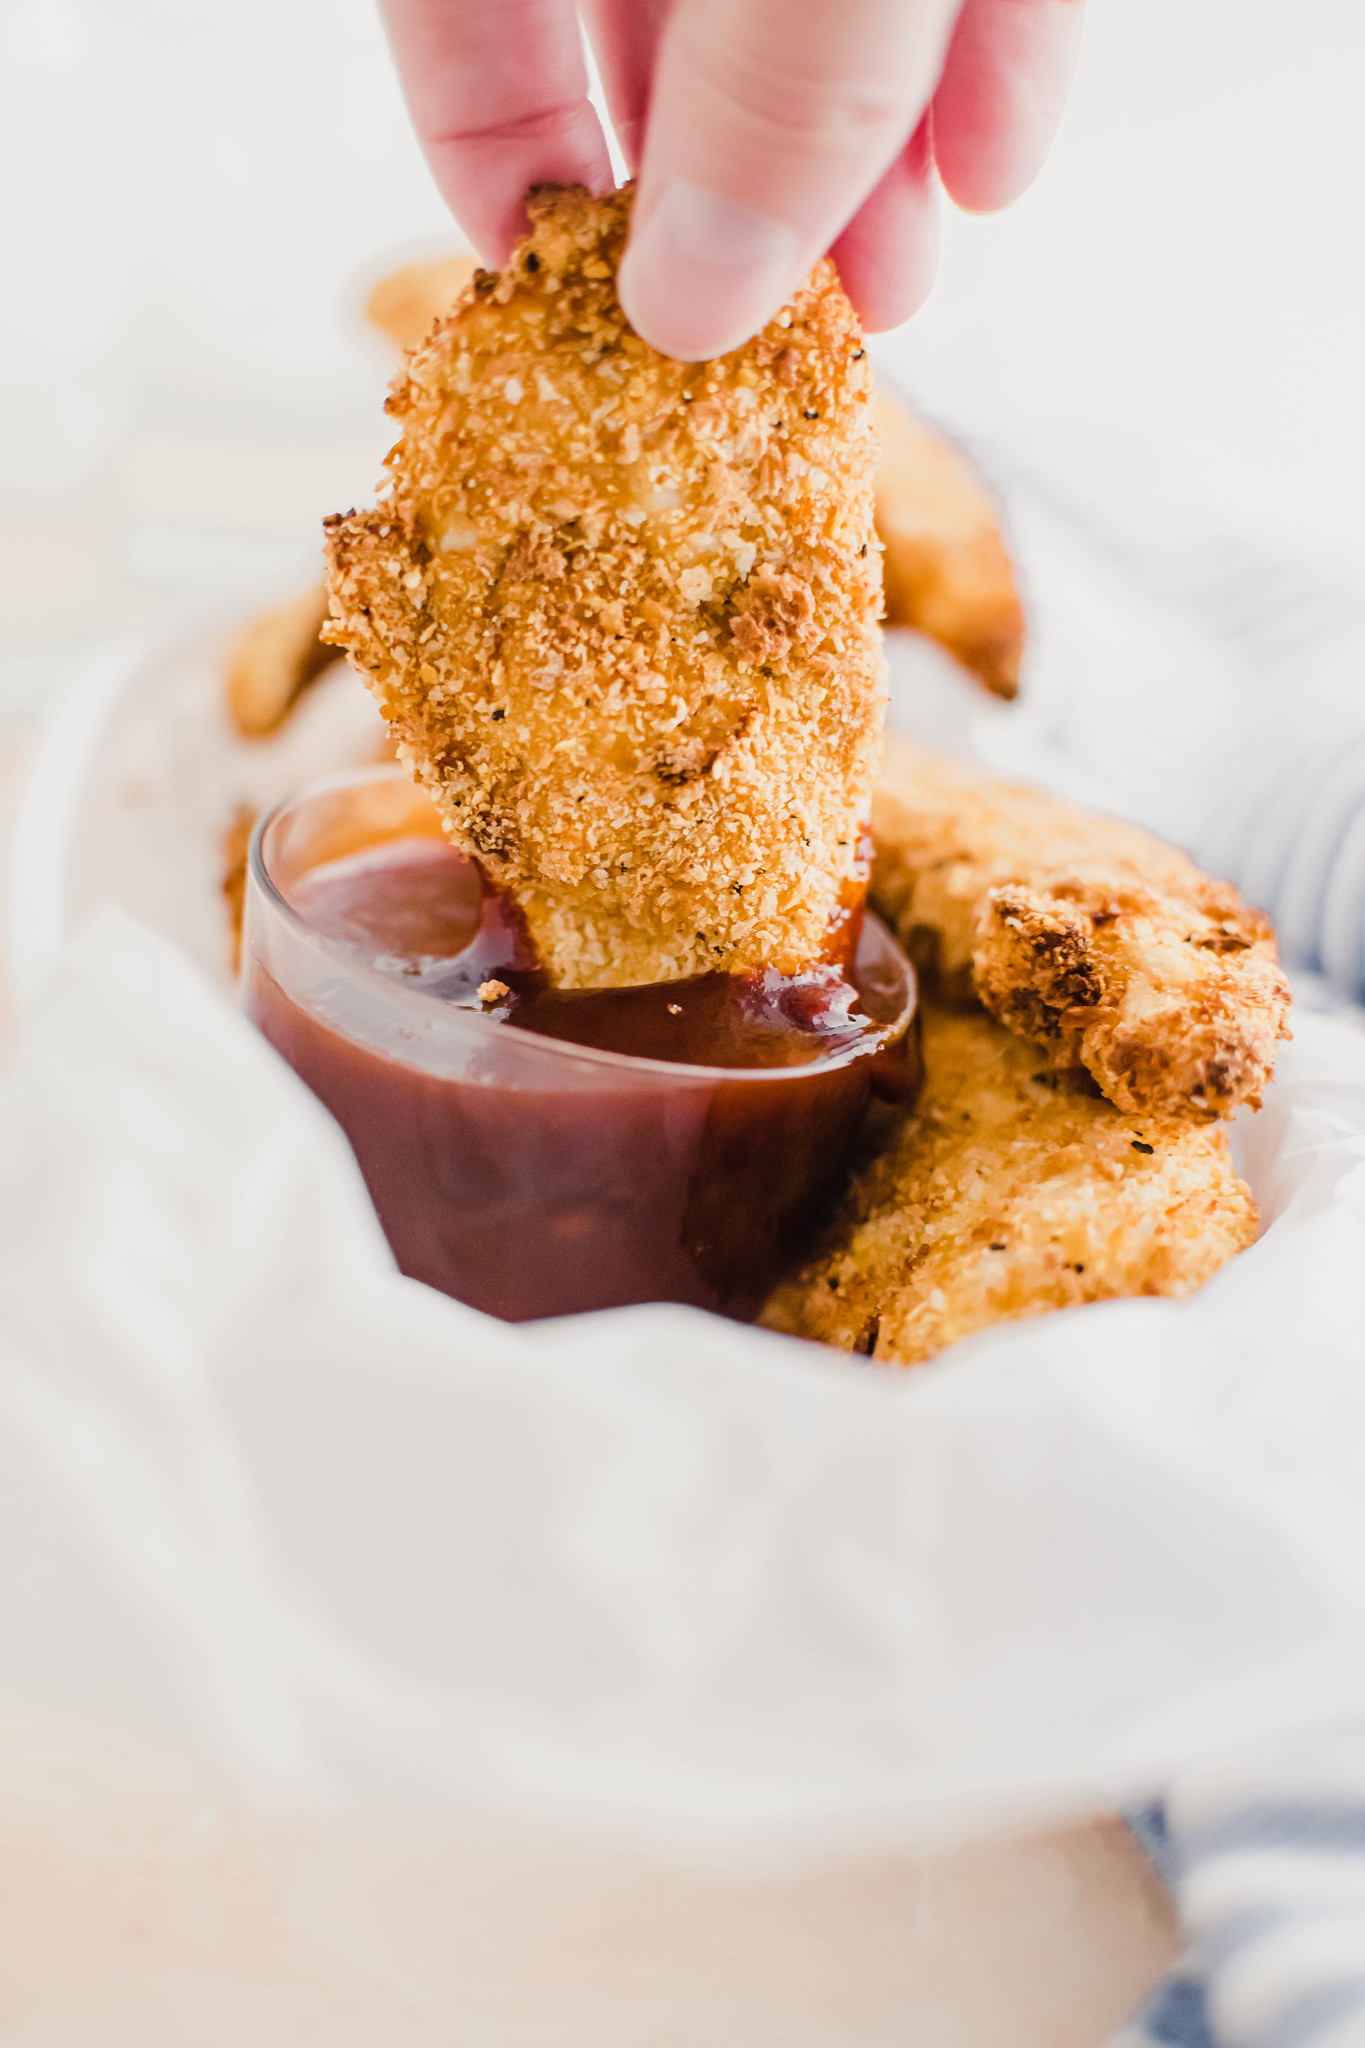 Hand dipping chicken tender into a glass bowl of barbecue sauce.